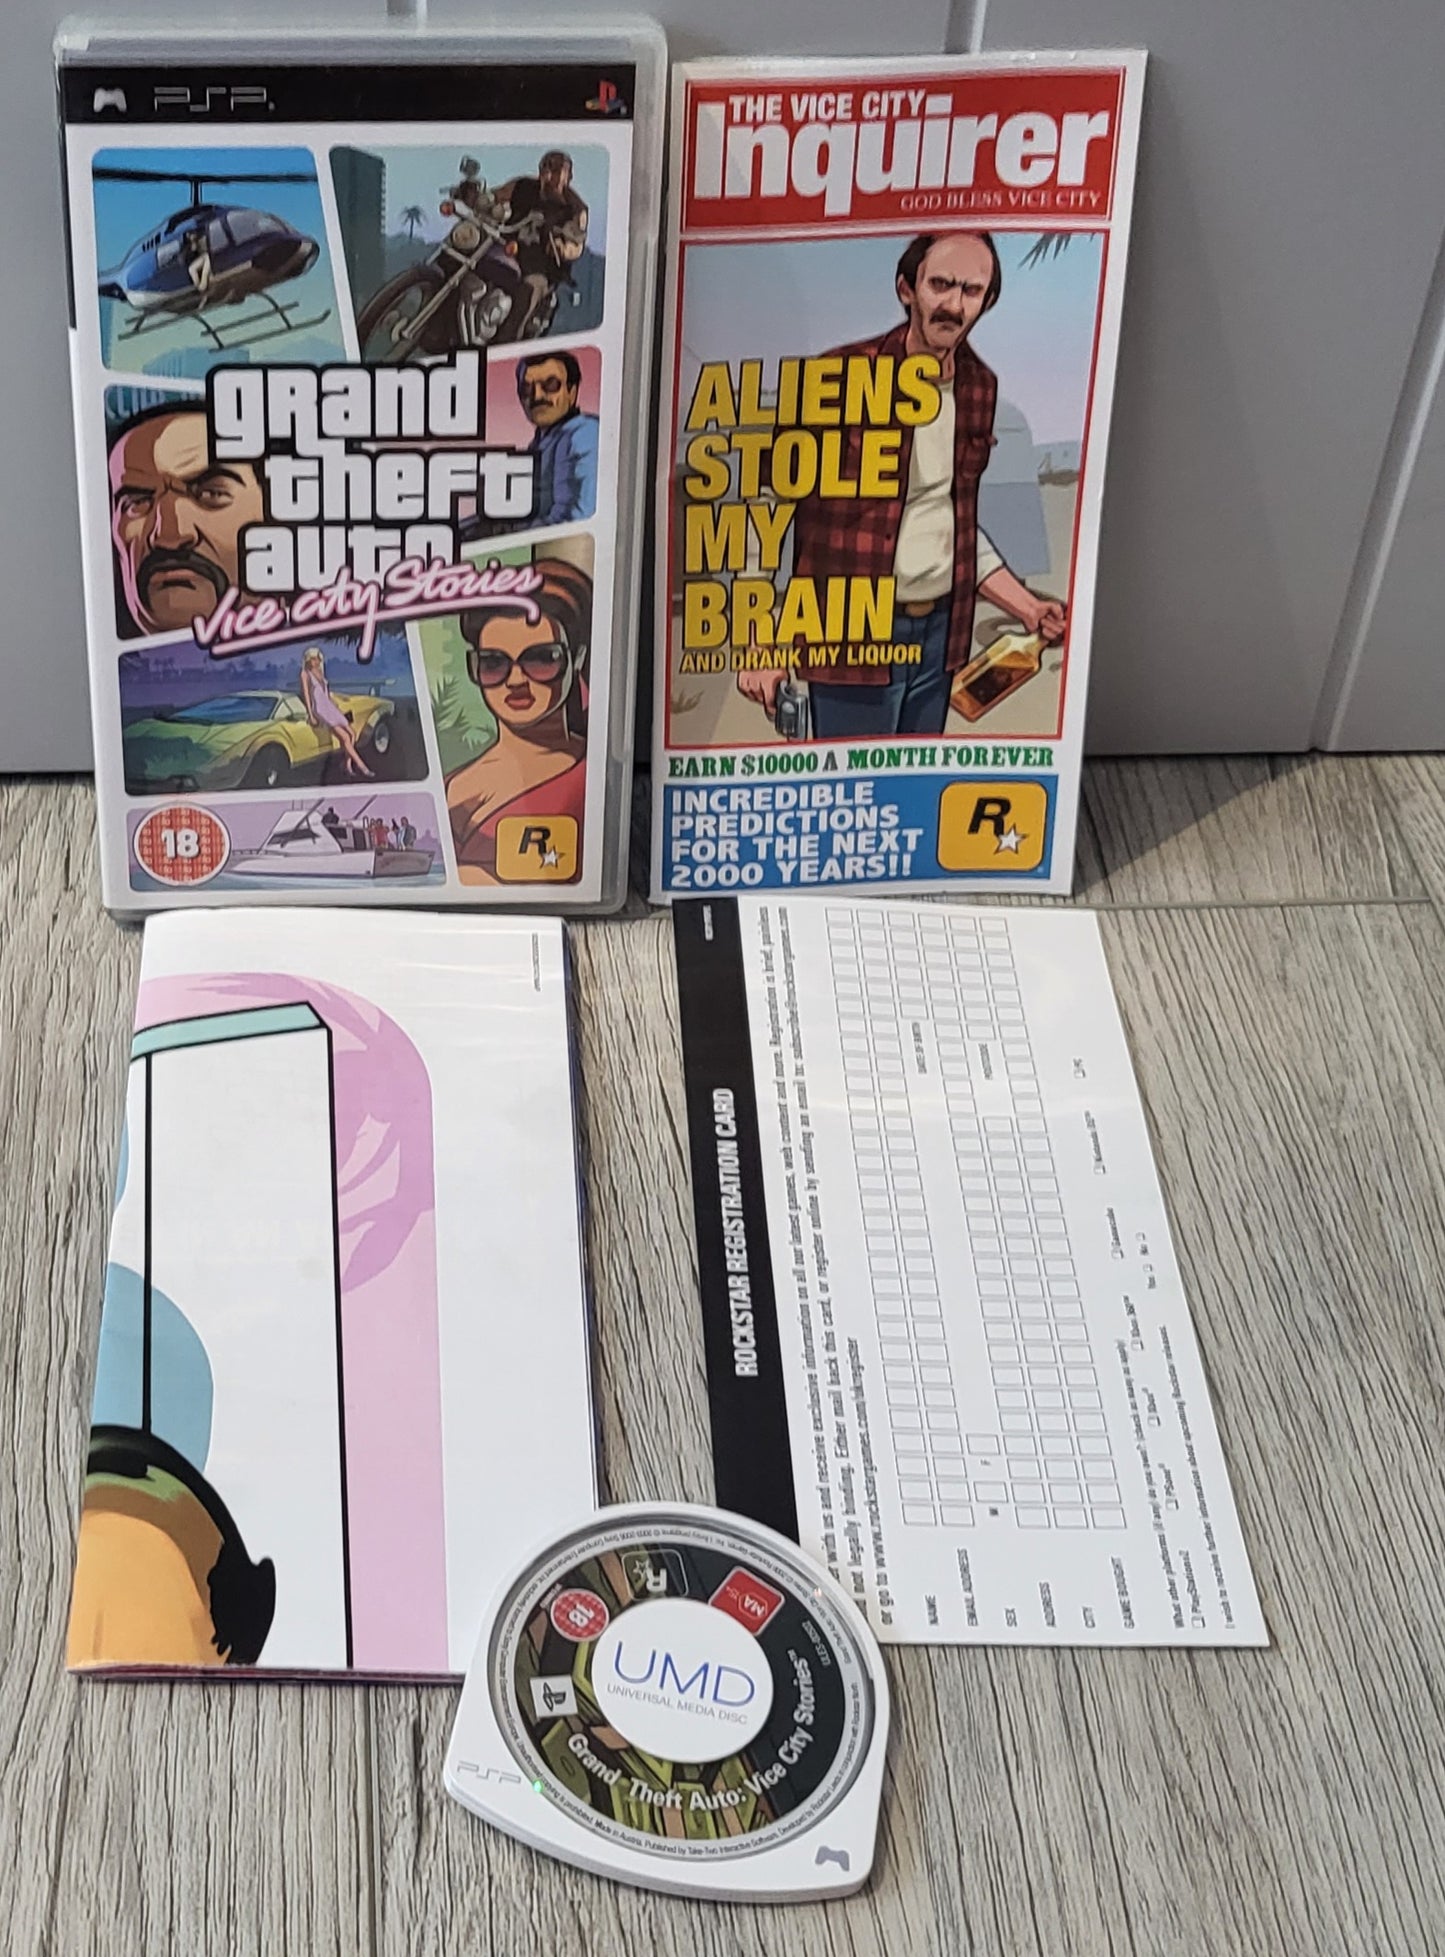 Grand Theft Auto Vice City Stories with Map Sony PSP Game